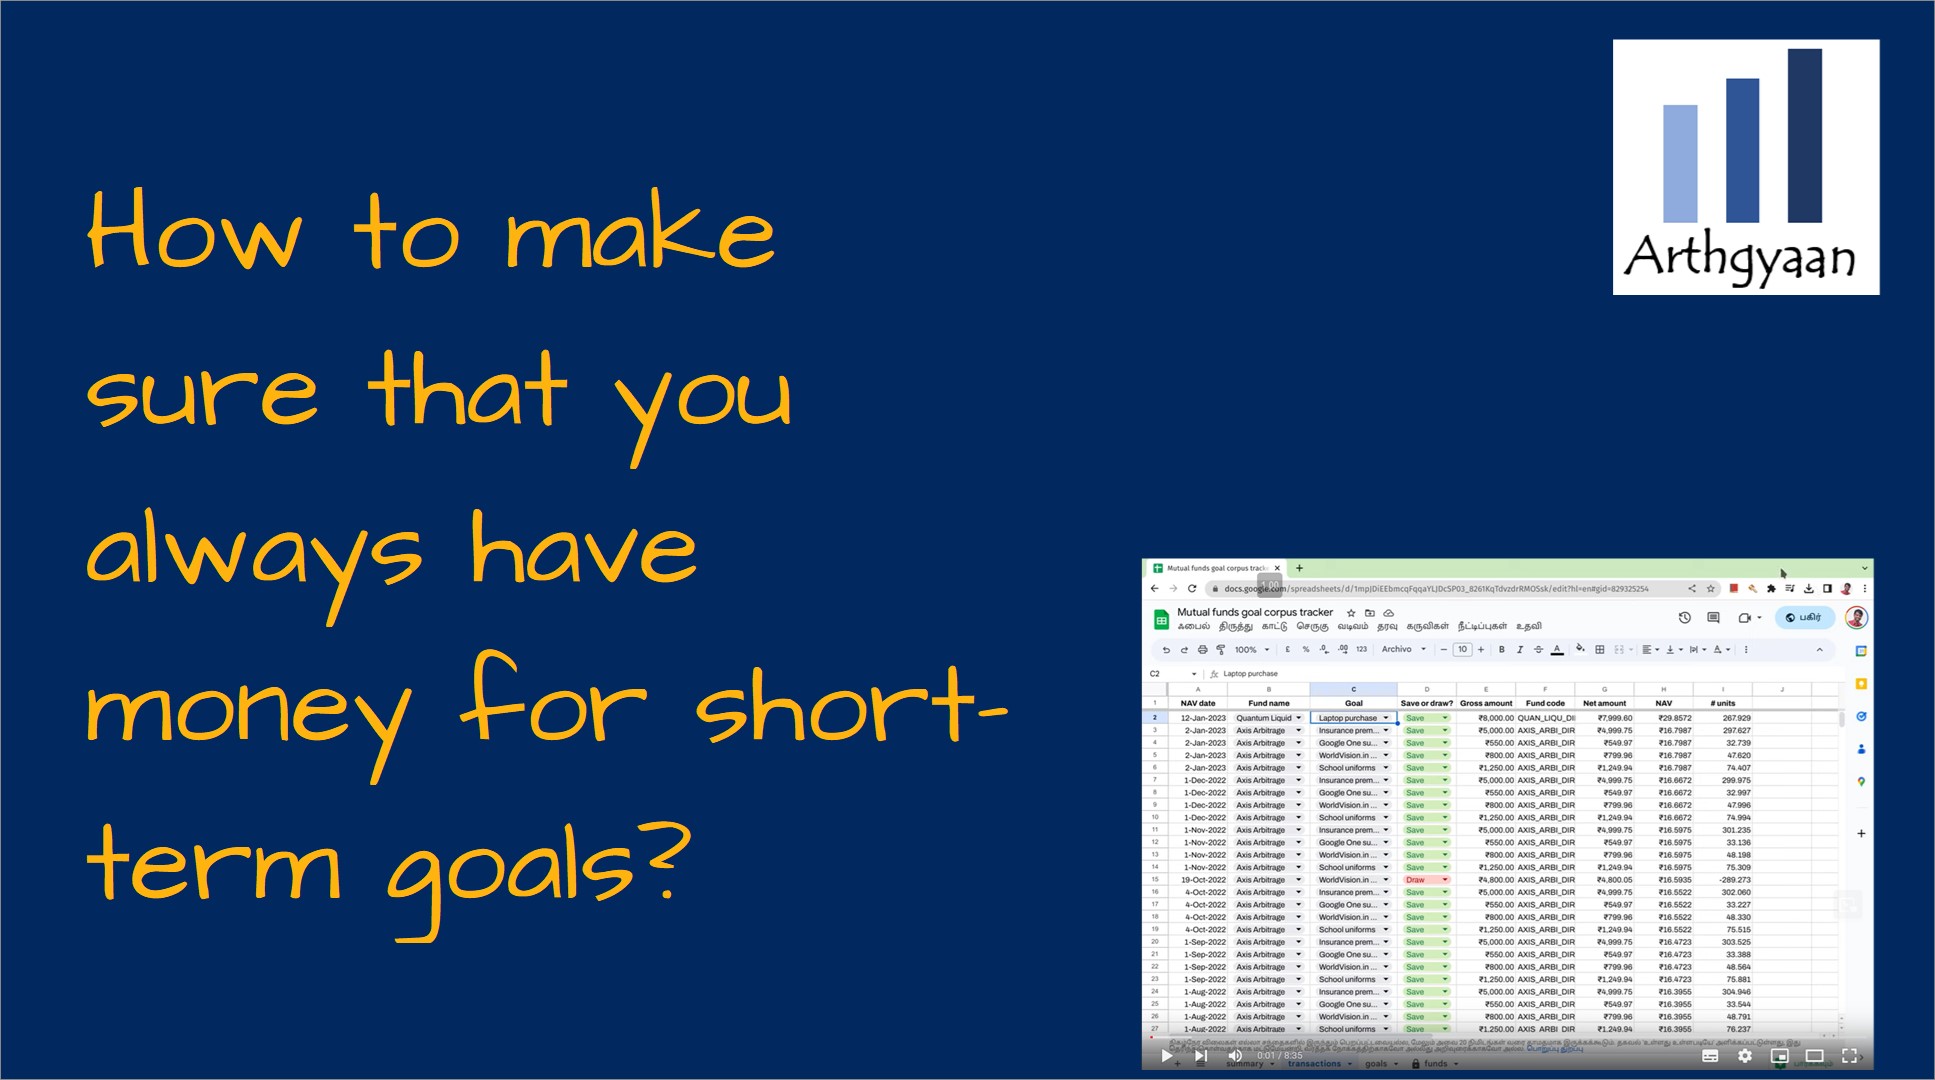 How to make sure that you always have money for short-term goals?